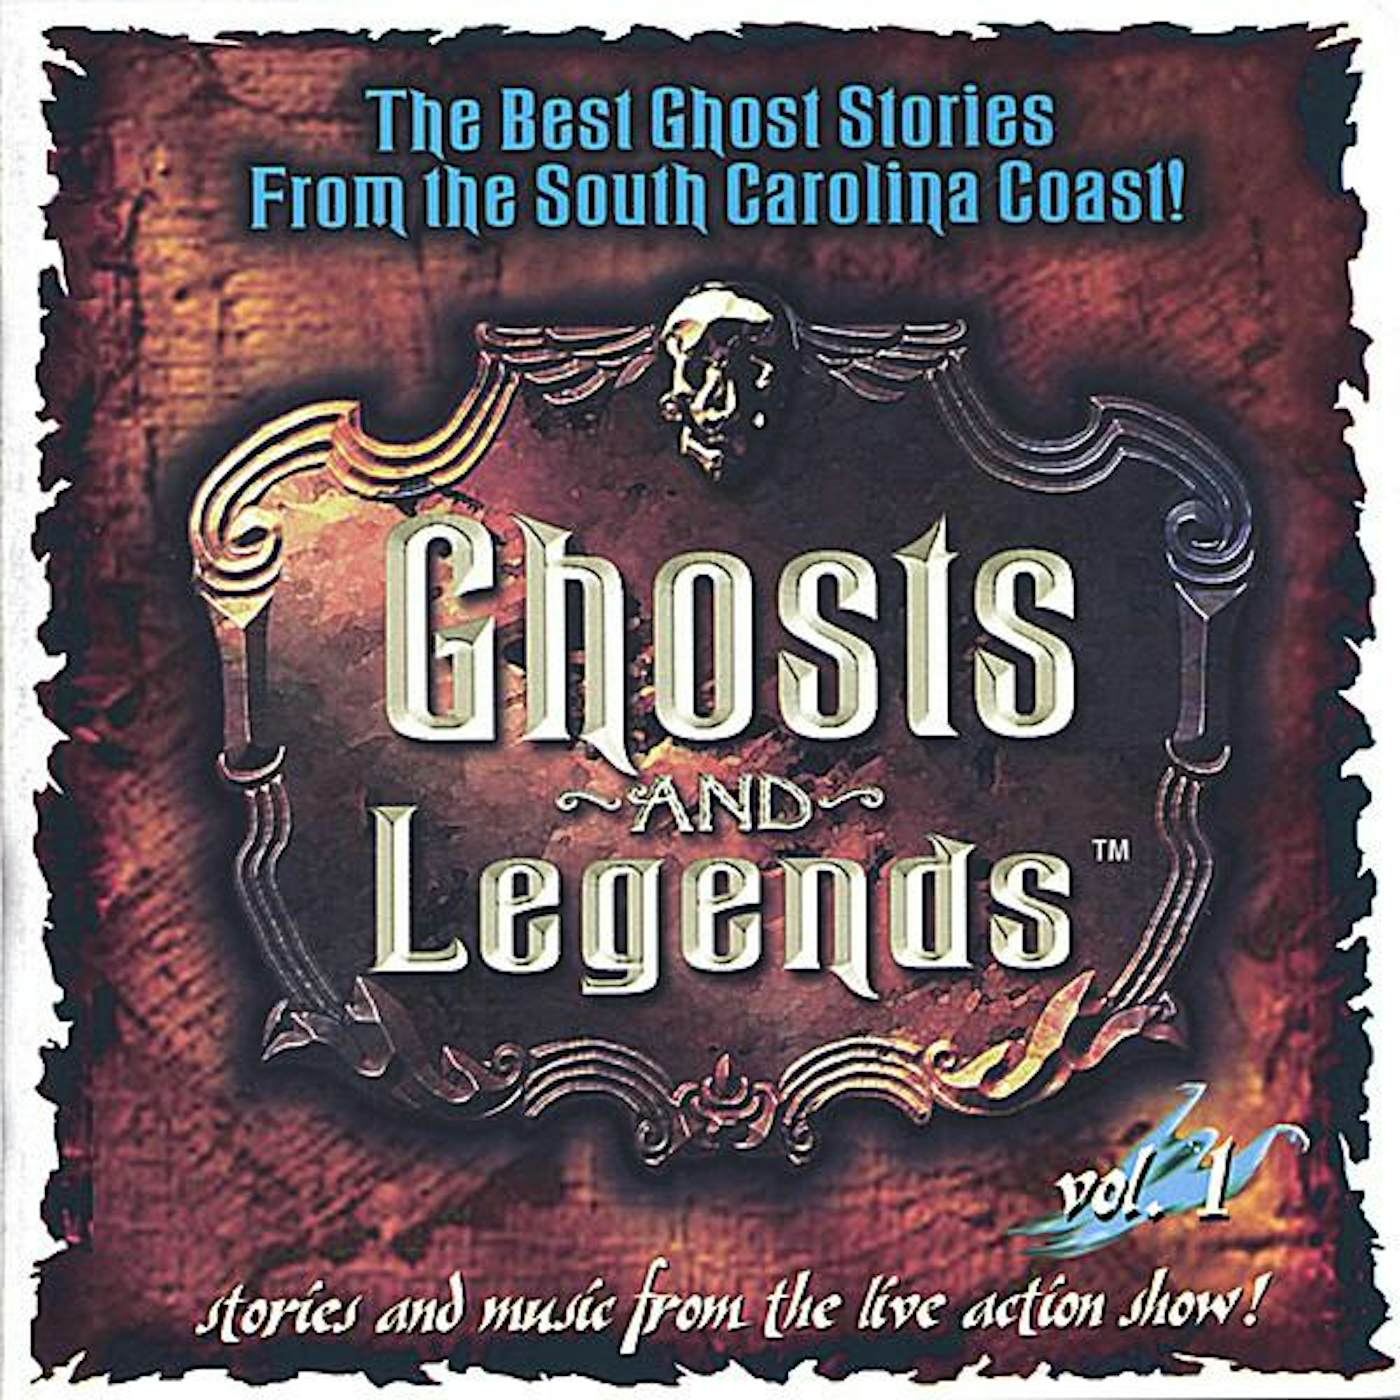 Ghost Stories GHOSTS & LEGENDS 1 CD